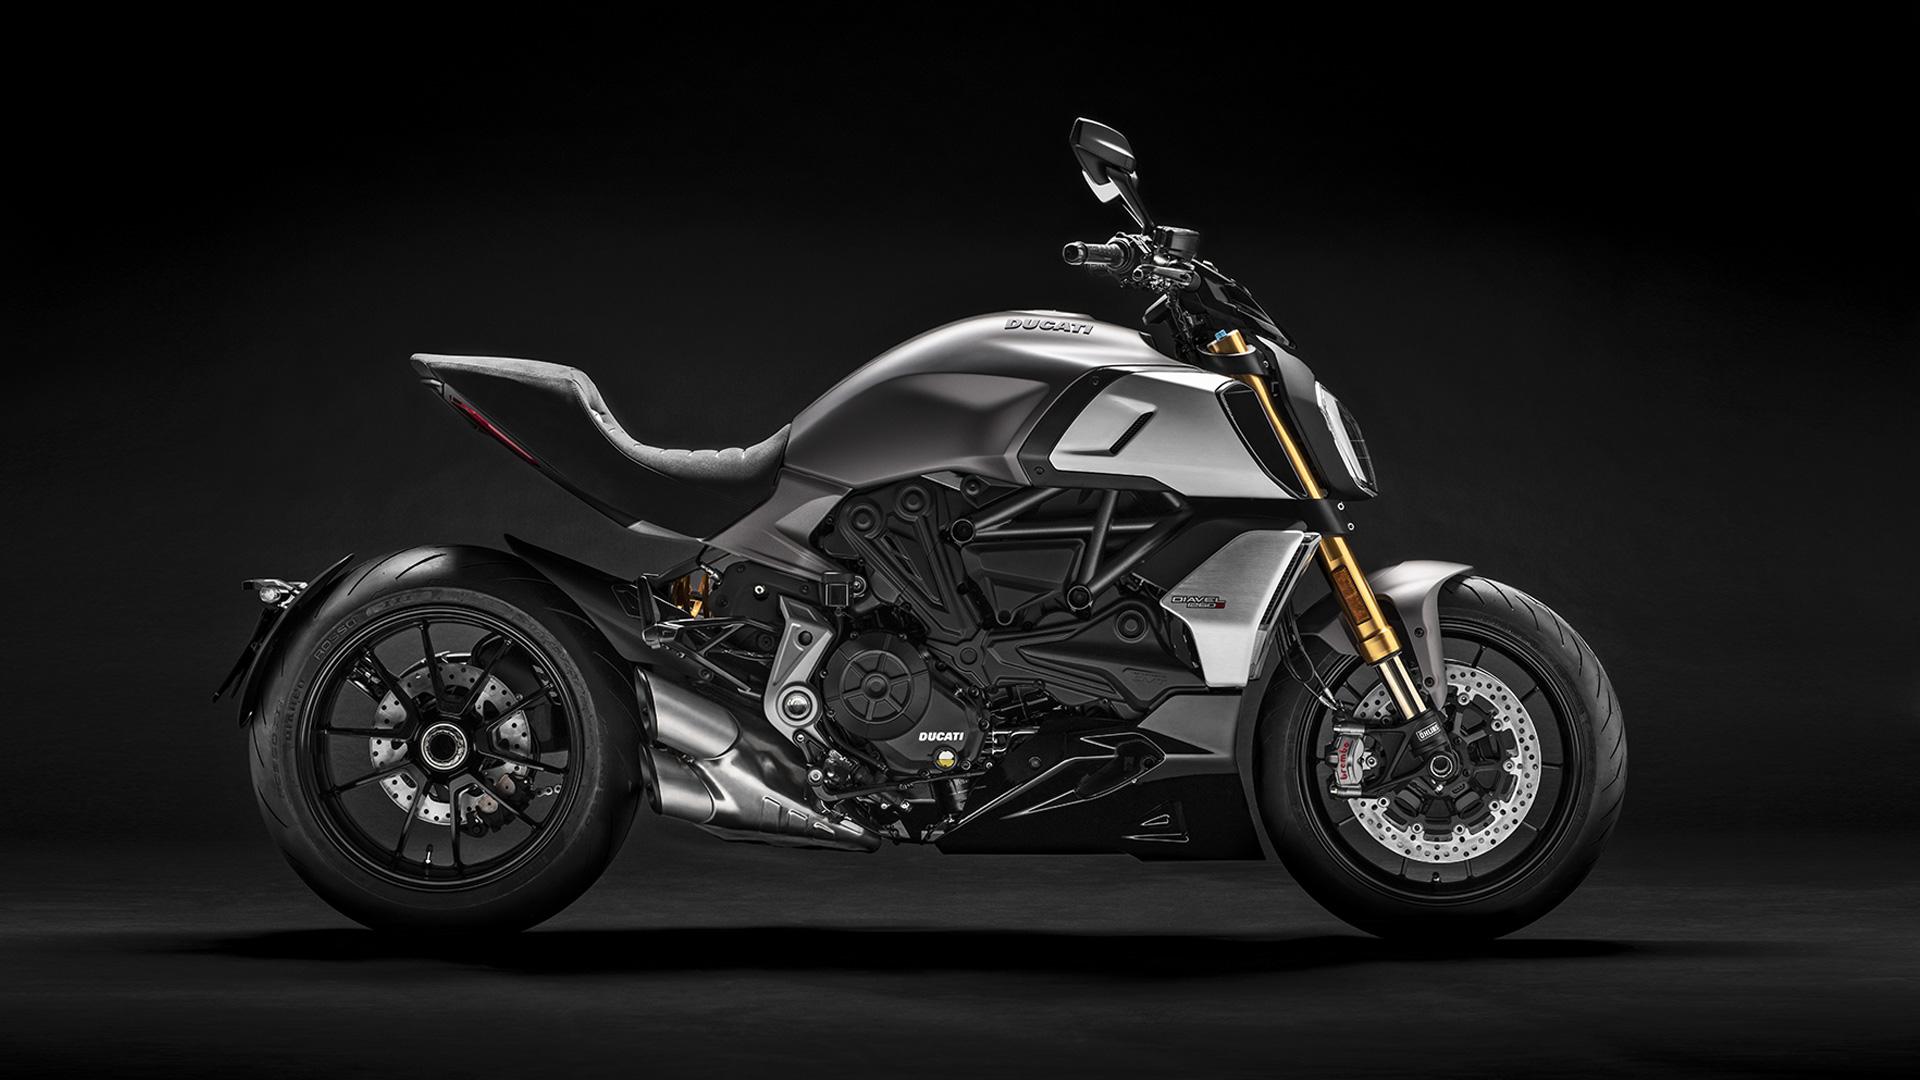 New Ducati Diavel 1260. The Maxi Naked Powerful And Muscular